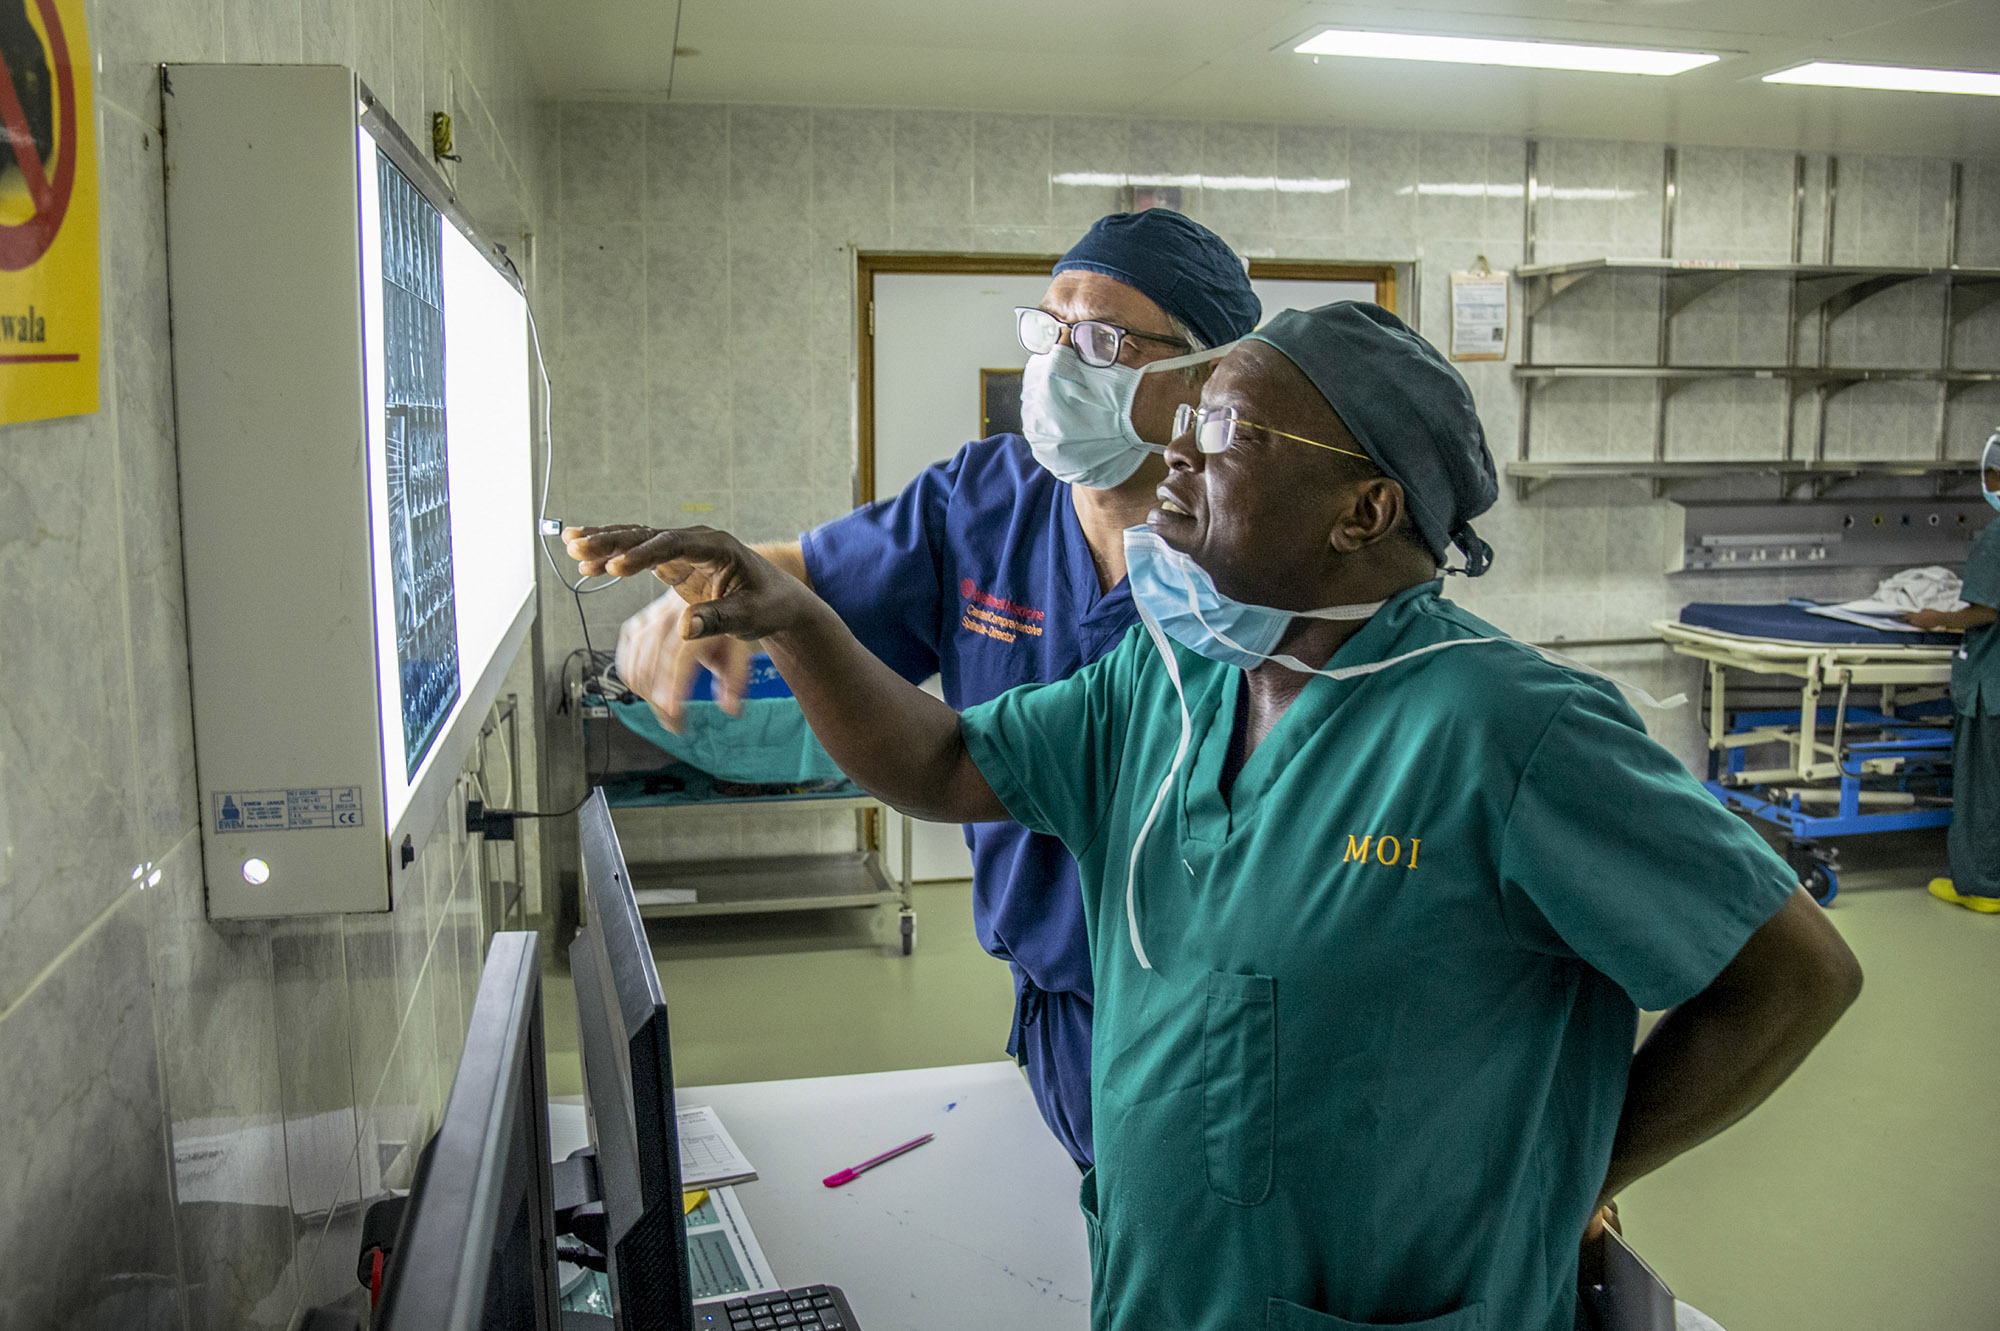 Physicans_discussing_x-rays_hospital_africa.jpg